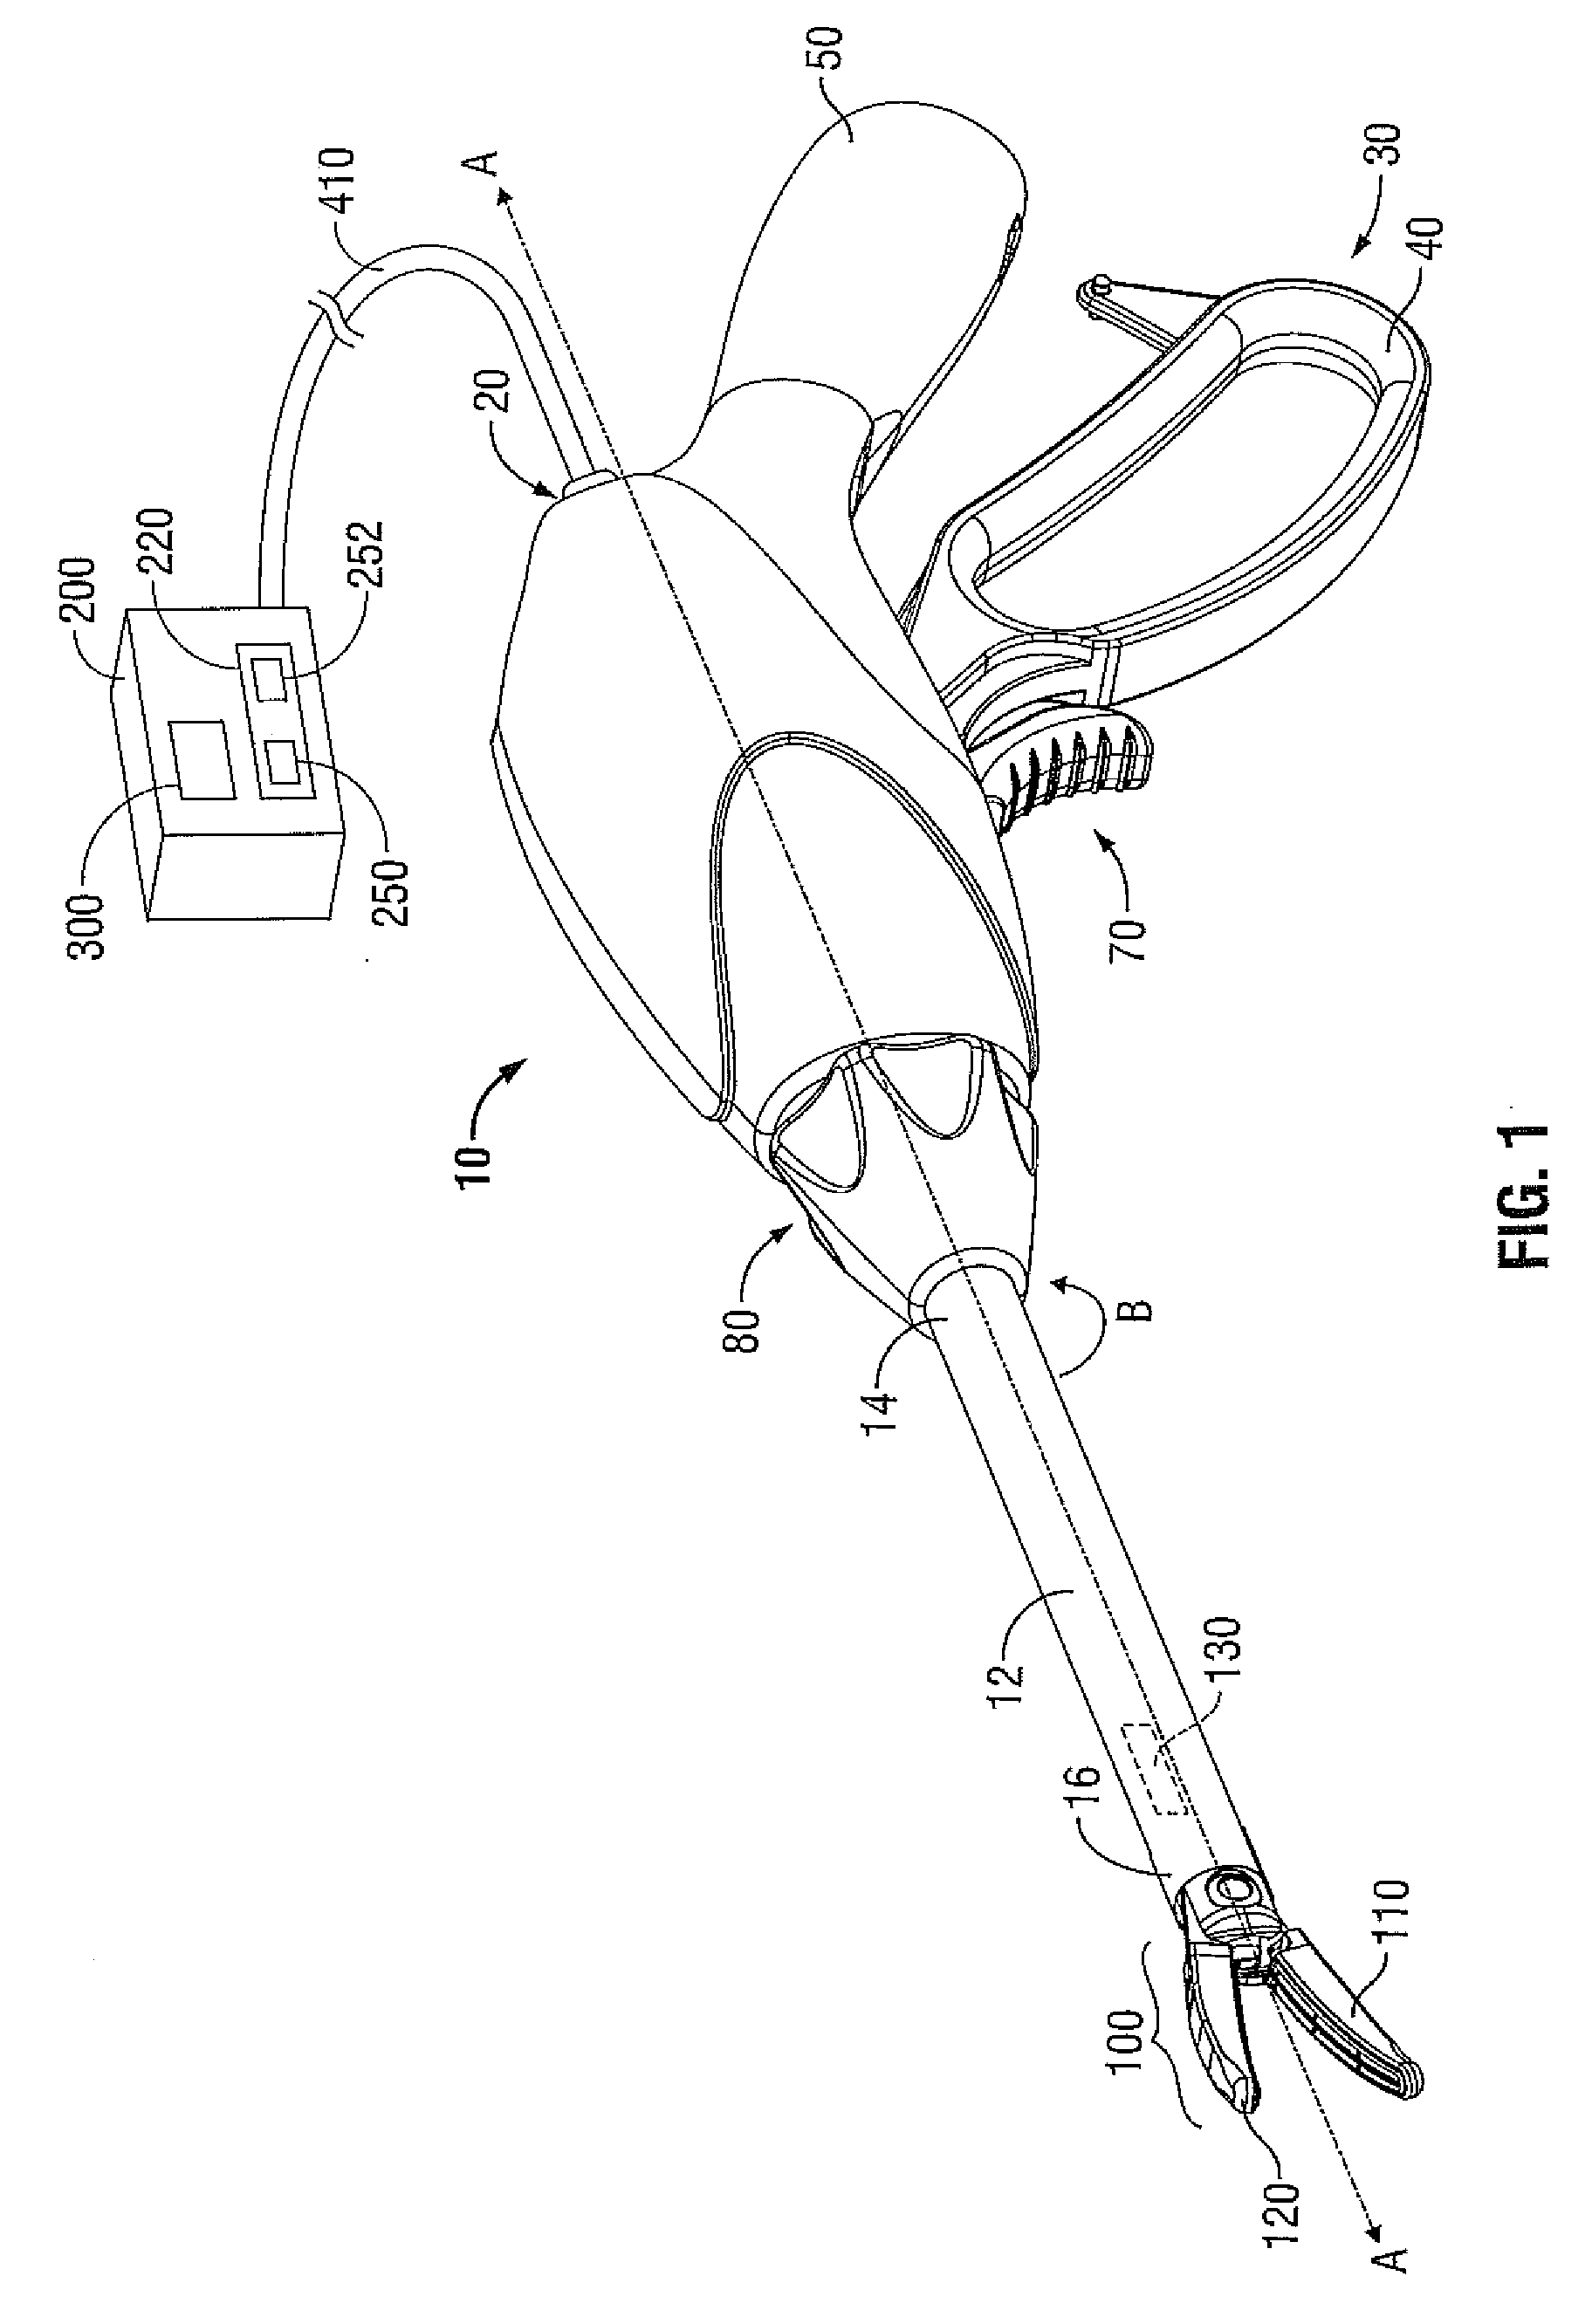 Apparatus, System, and Method for Performing an Electrosurgical Procedure